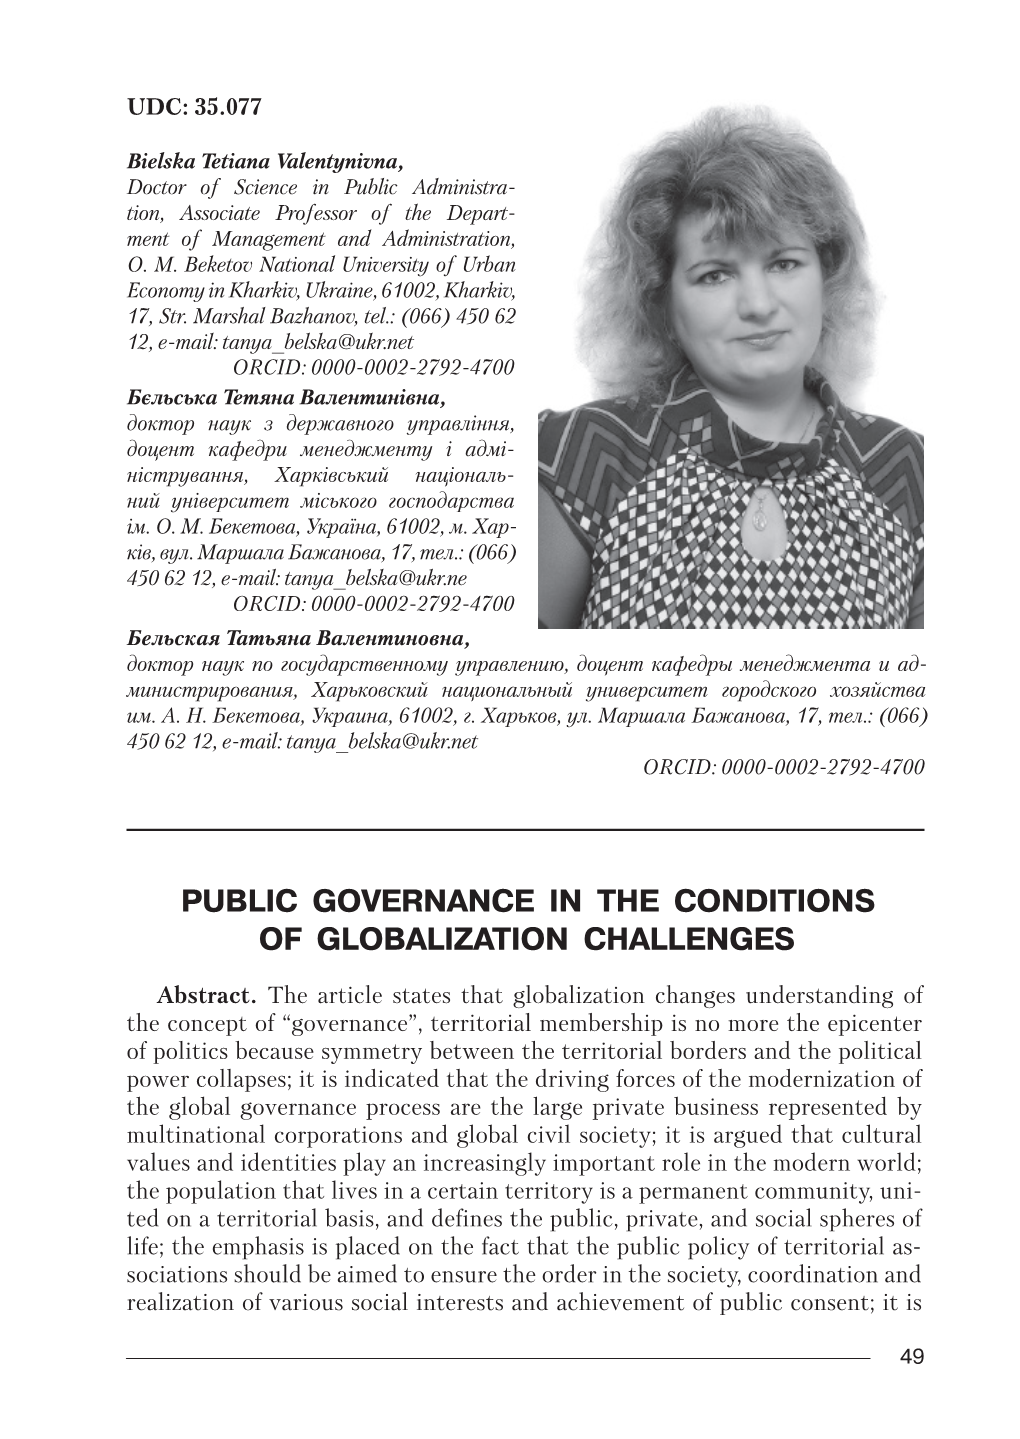 Public Governance in the Conditions of Globalization Challenges